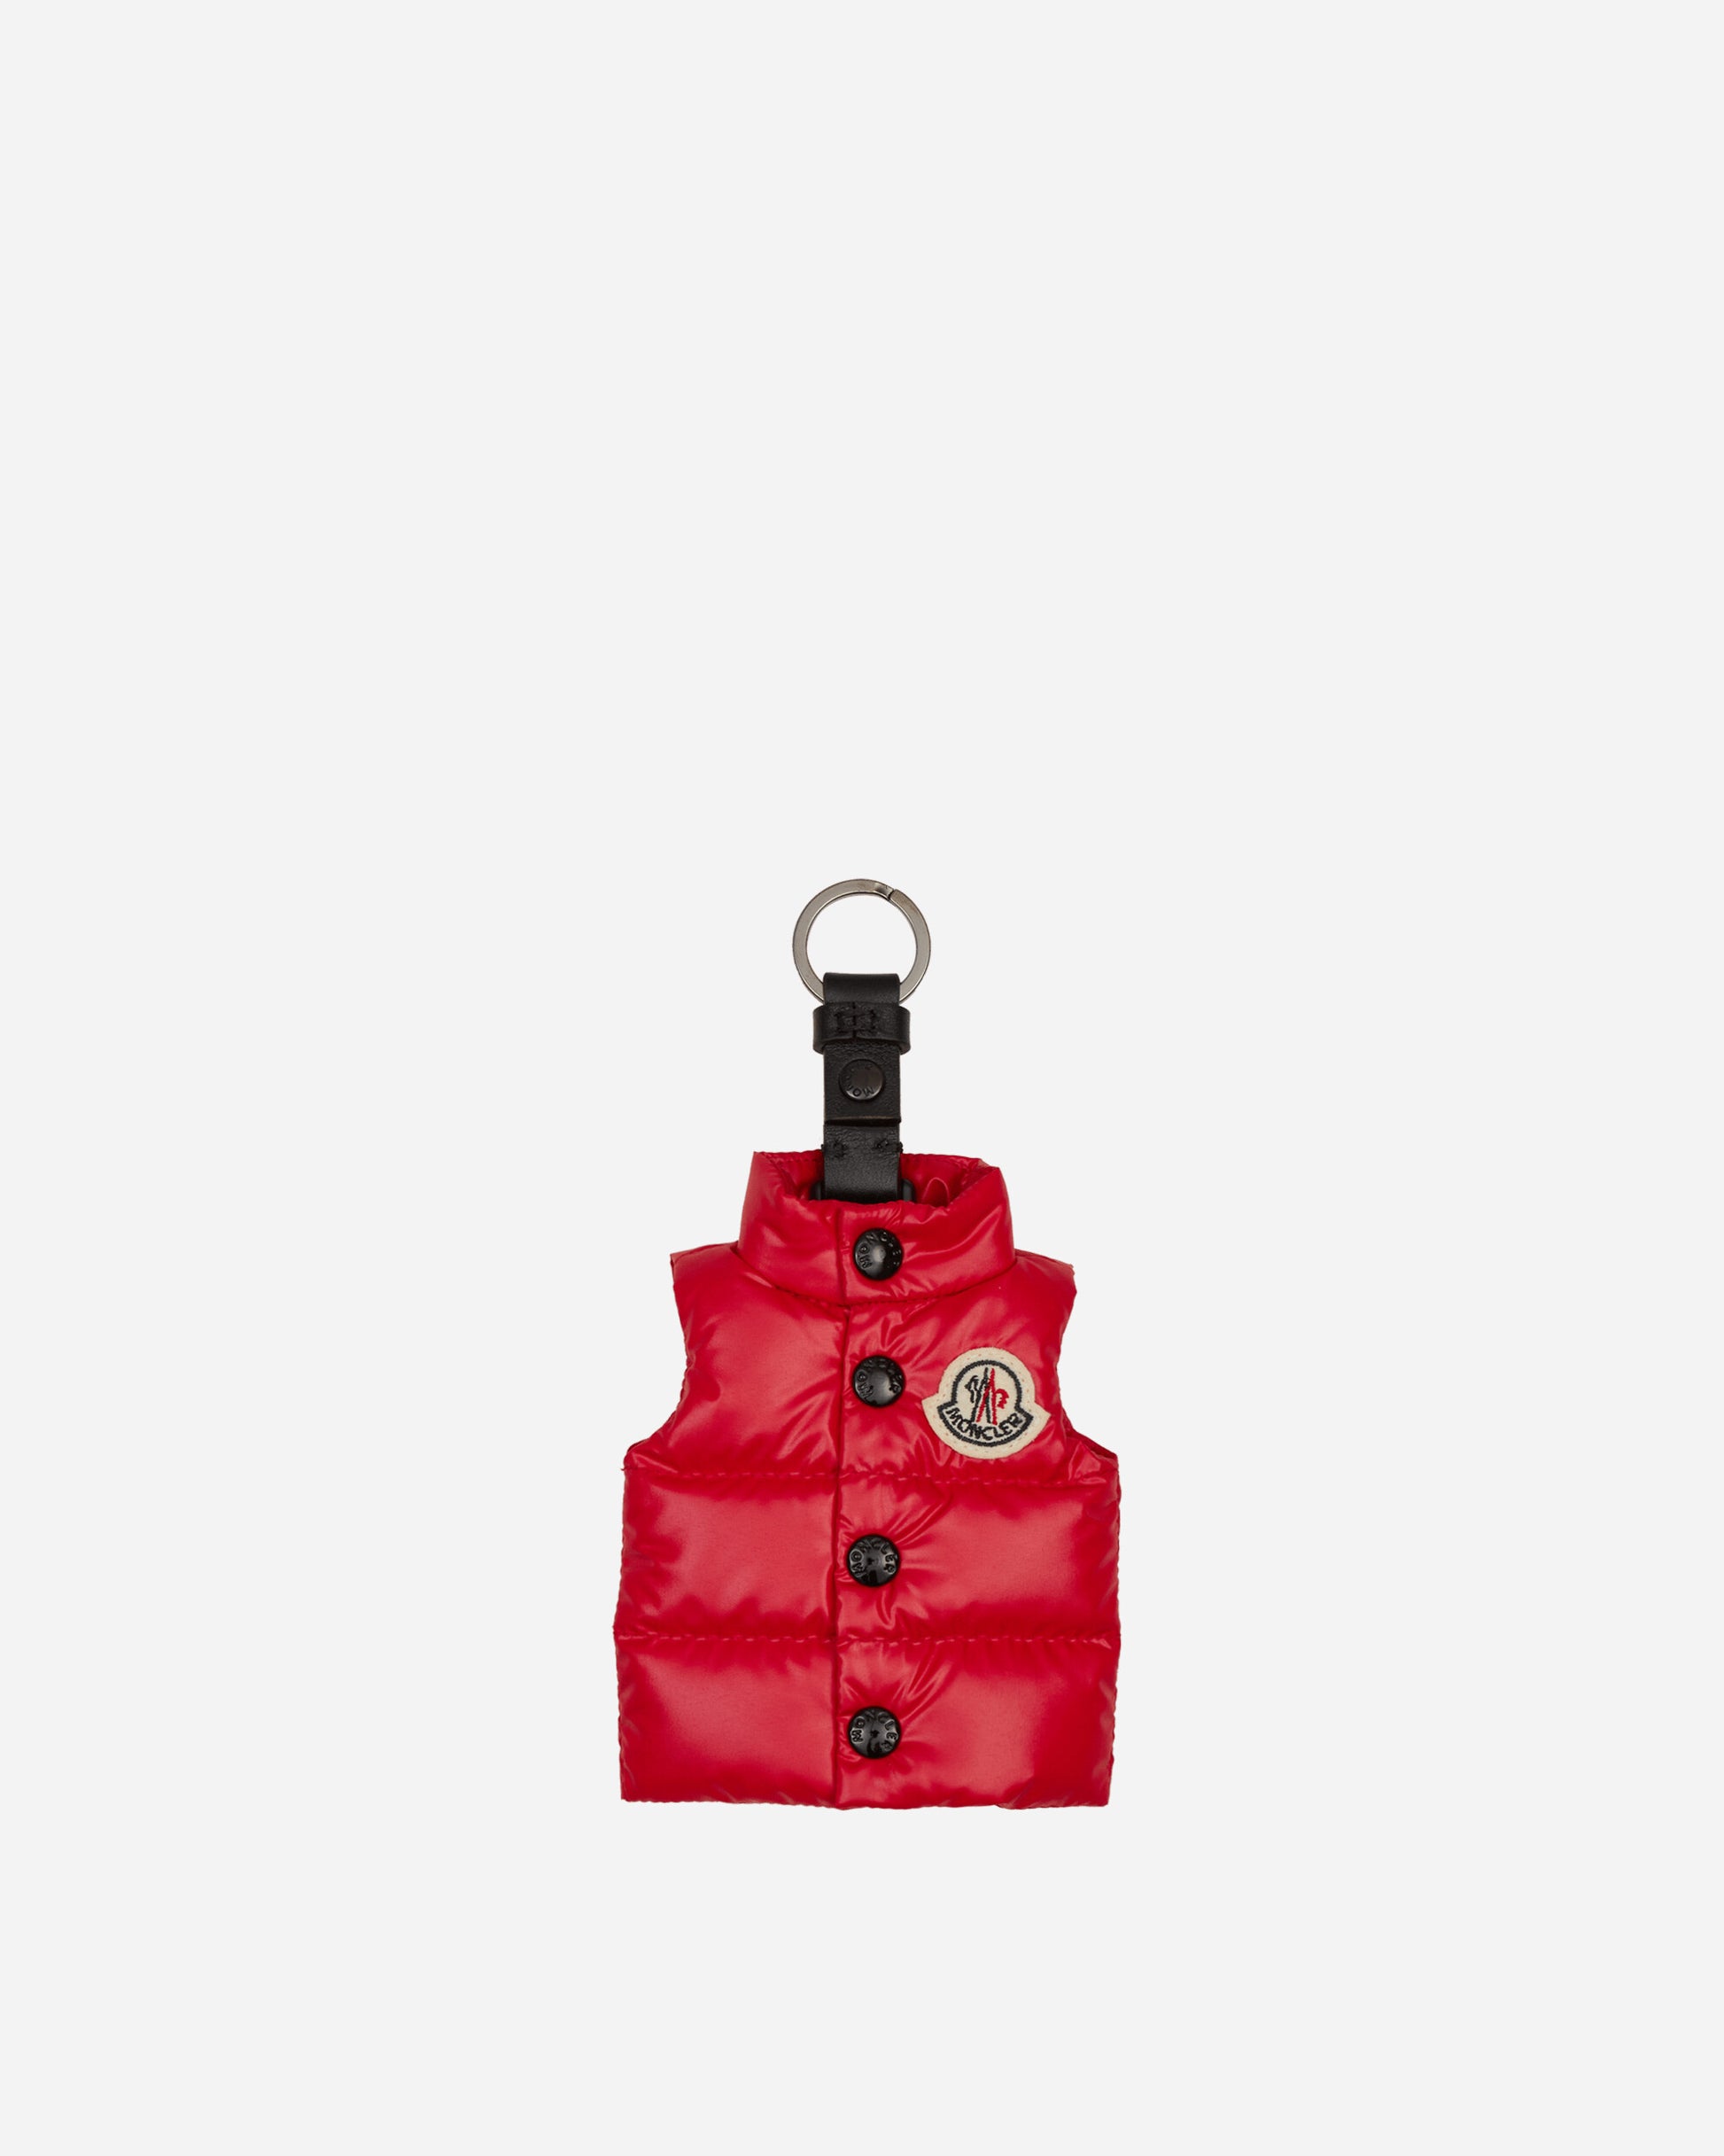 Moncler Vest Key Ring Red Small Accessories Keychains 6F00003M4058 455